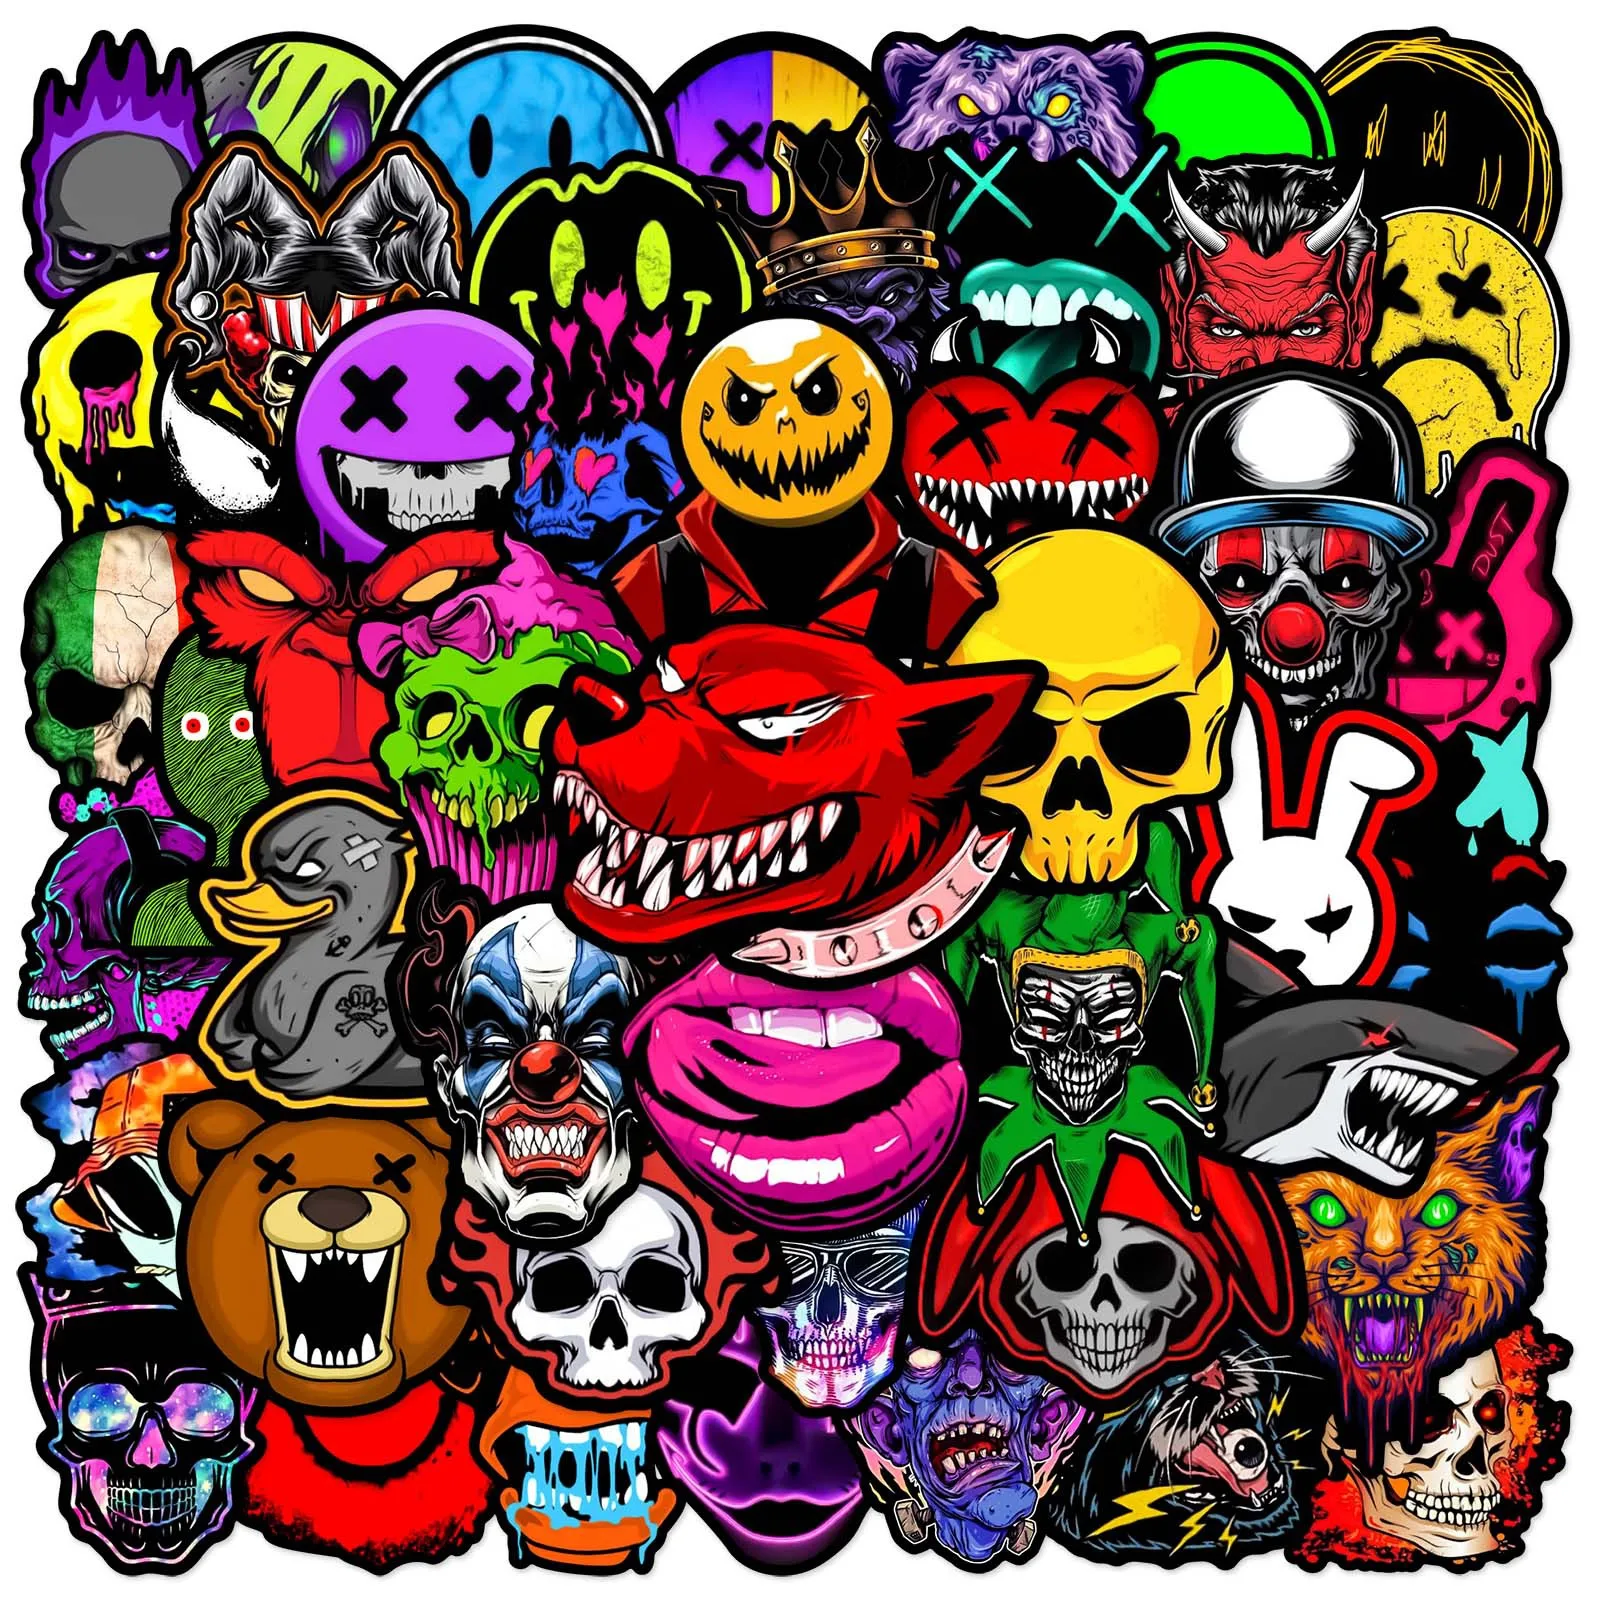 10/30/50Pcs Cool Pop Horror Stickers Cartoon Graffiti Decals for Phone Skateboard Guitar Laptop Motorcycle Helmet Sticker Toys 50pcs cool pop horror skull stickers cartoon decals stationery luggage laptop helmet motorcycle graffiti zombie sticker